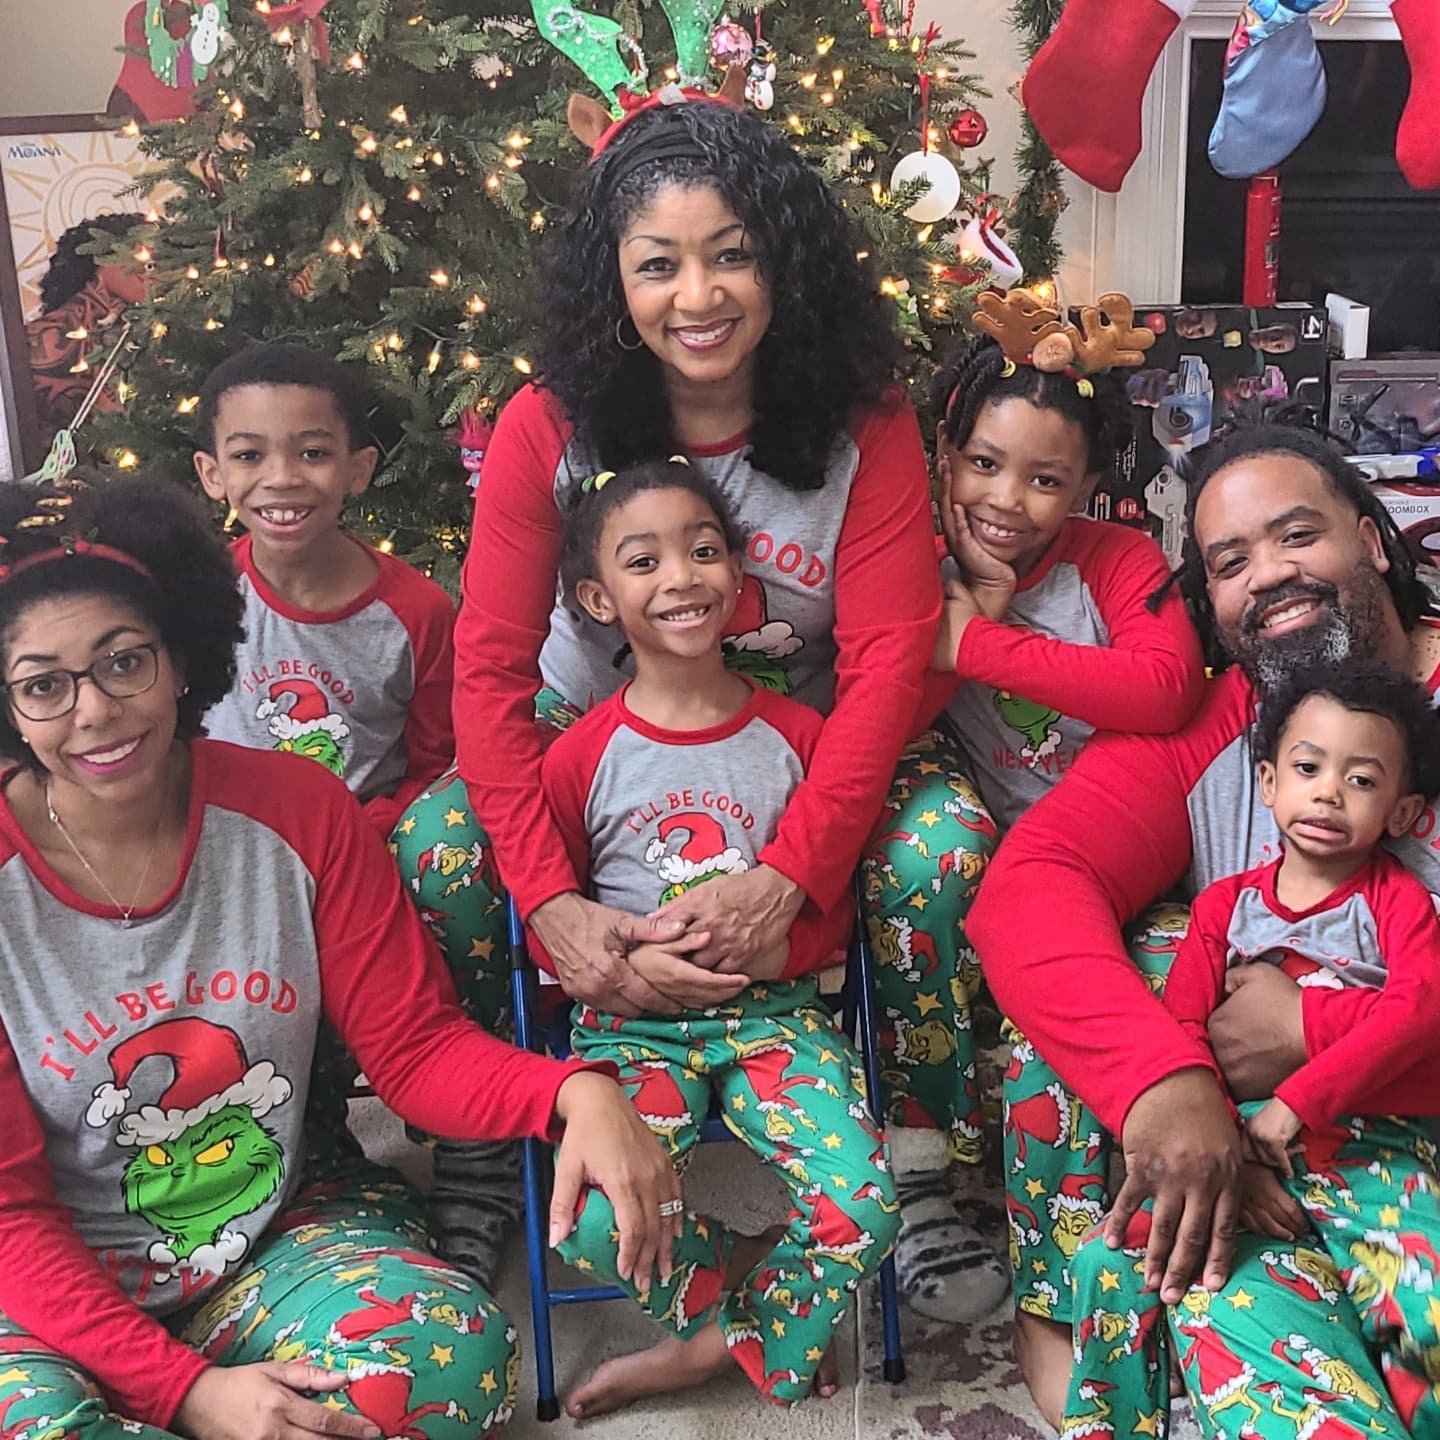 Carleigh Edwards with her family at Christmas.